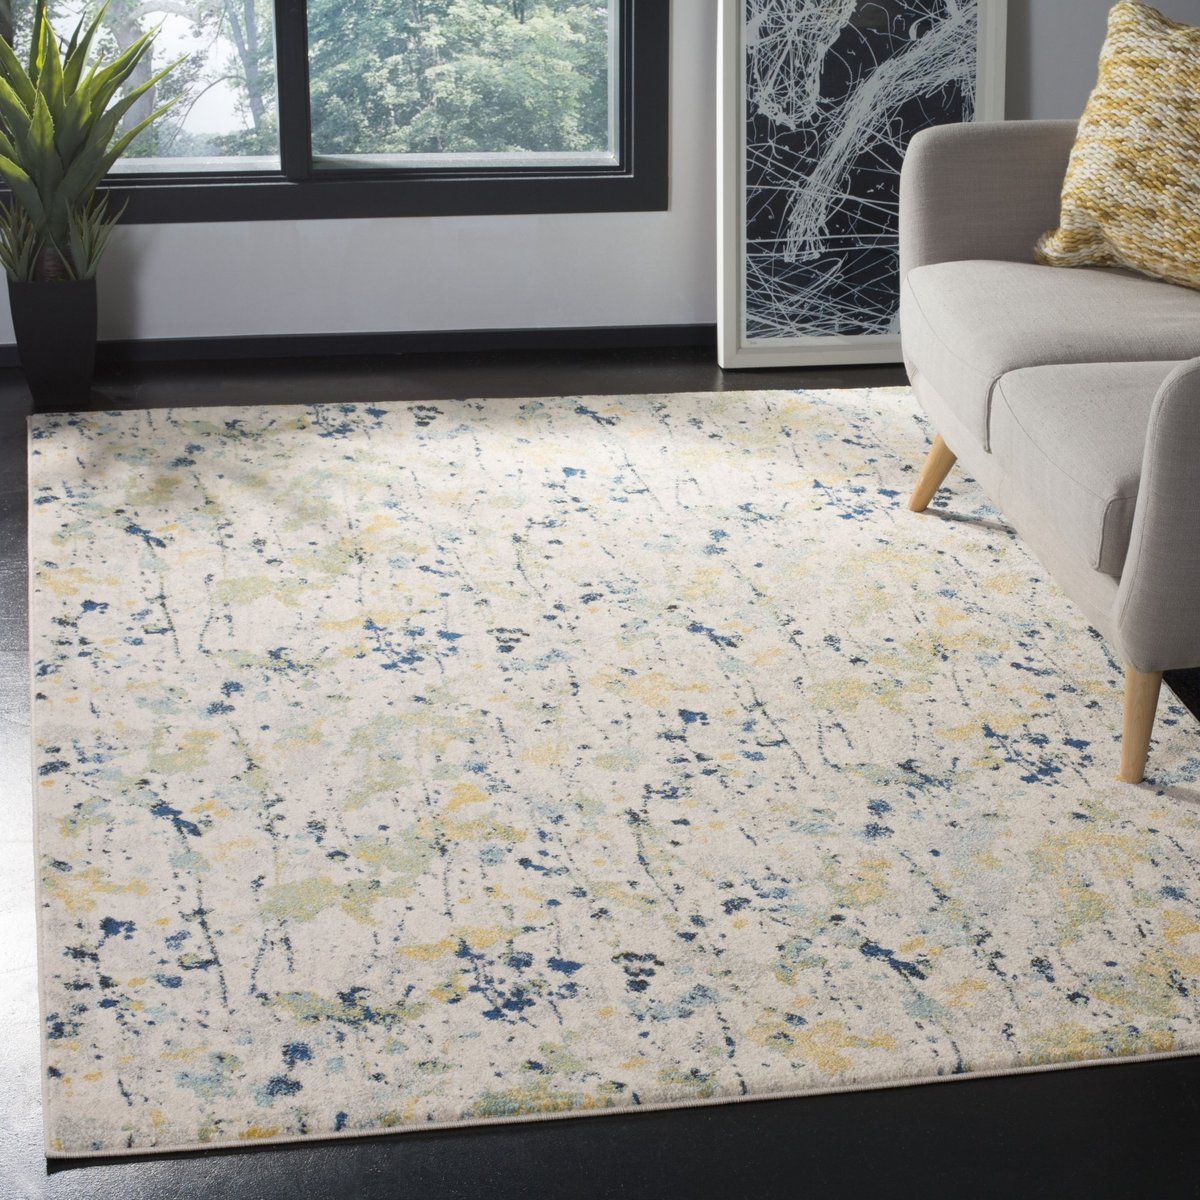 Safavieh Evoke Evk 284 Rugs | Rugs Direct With Yellow Ivory Rugs (View 10 of 15)